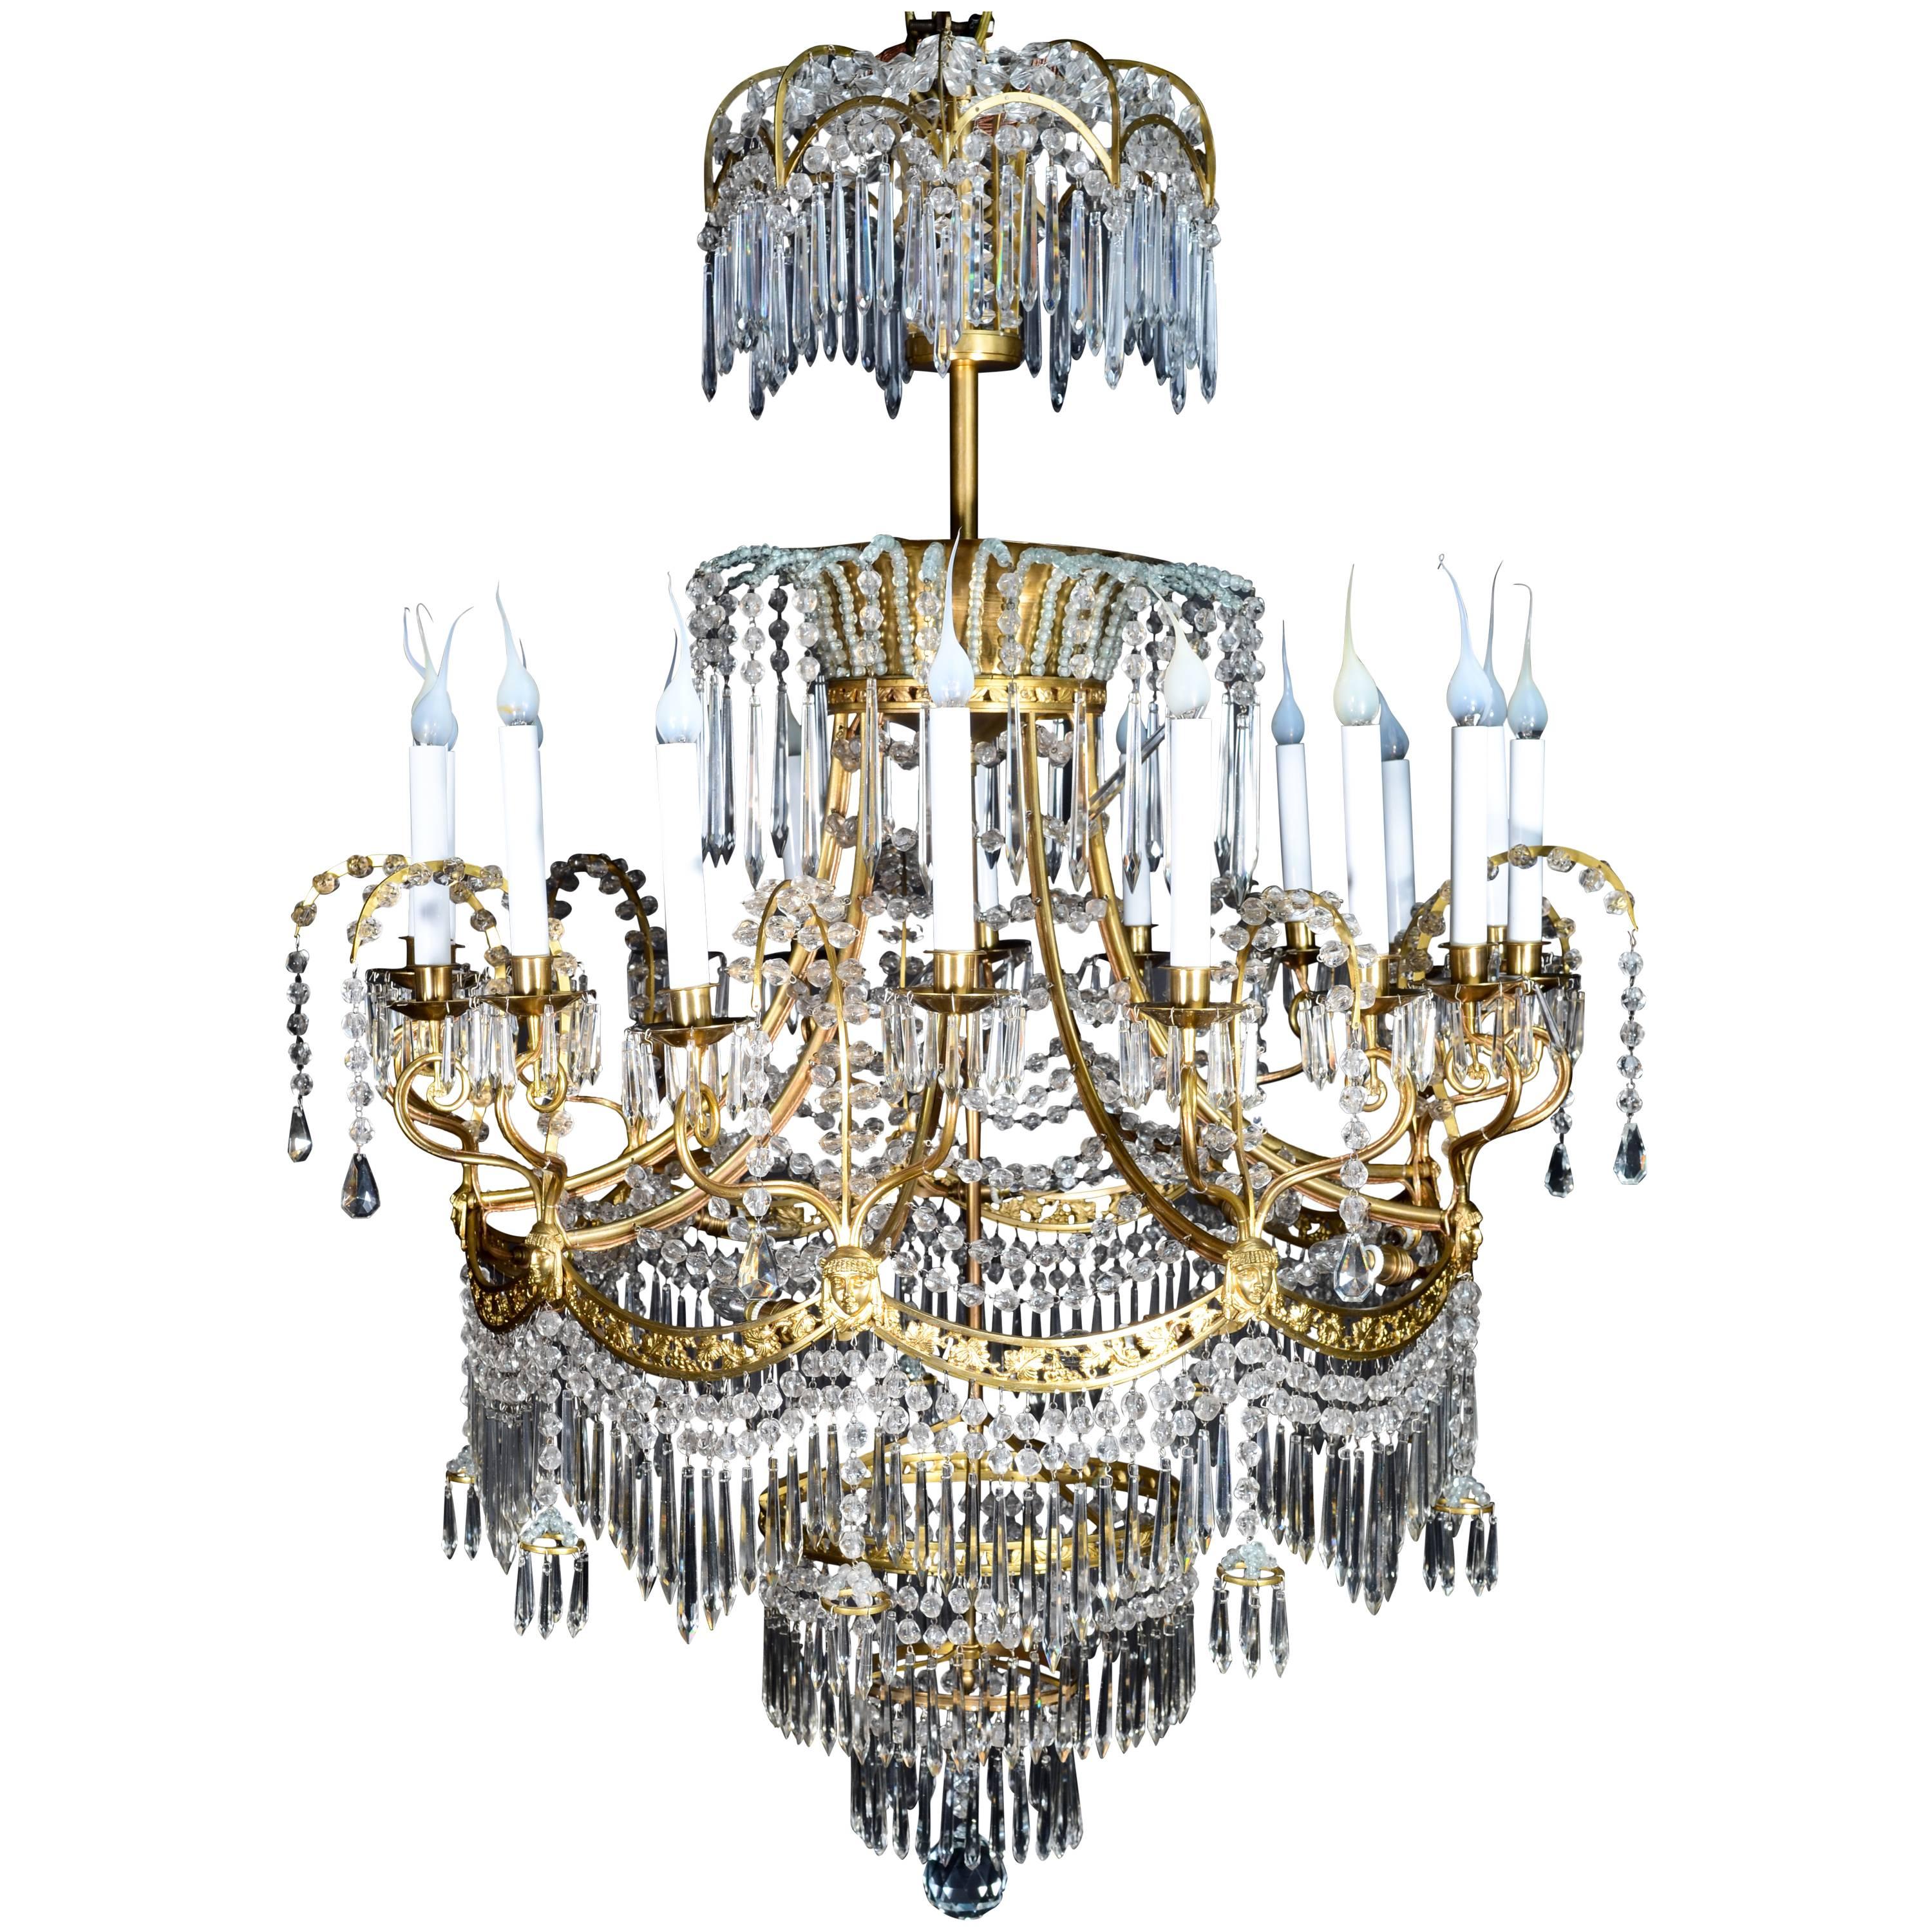 Palatial & Large Antique Russian Neoclassical Gilt Bronze and Crystal Chandelier